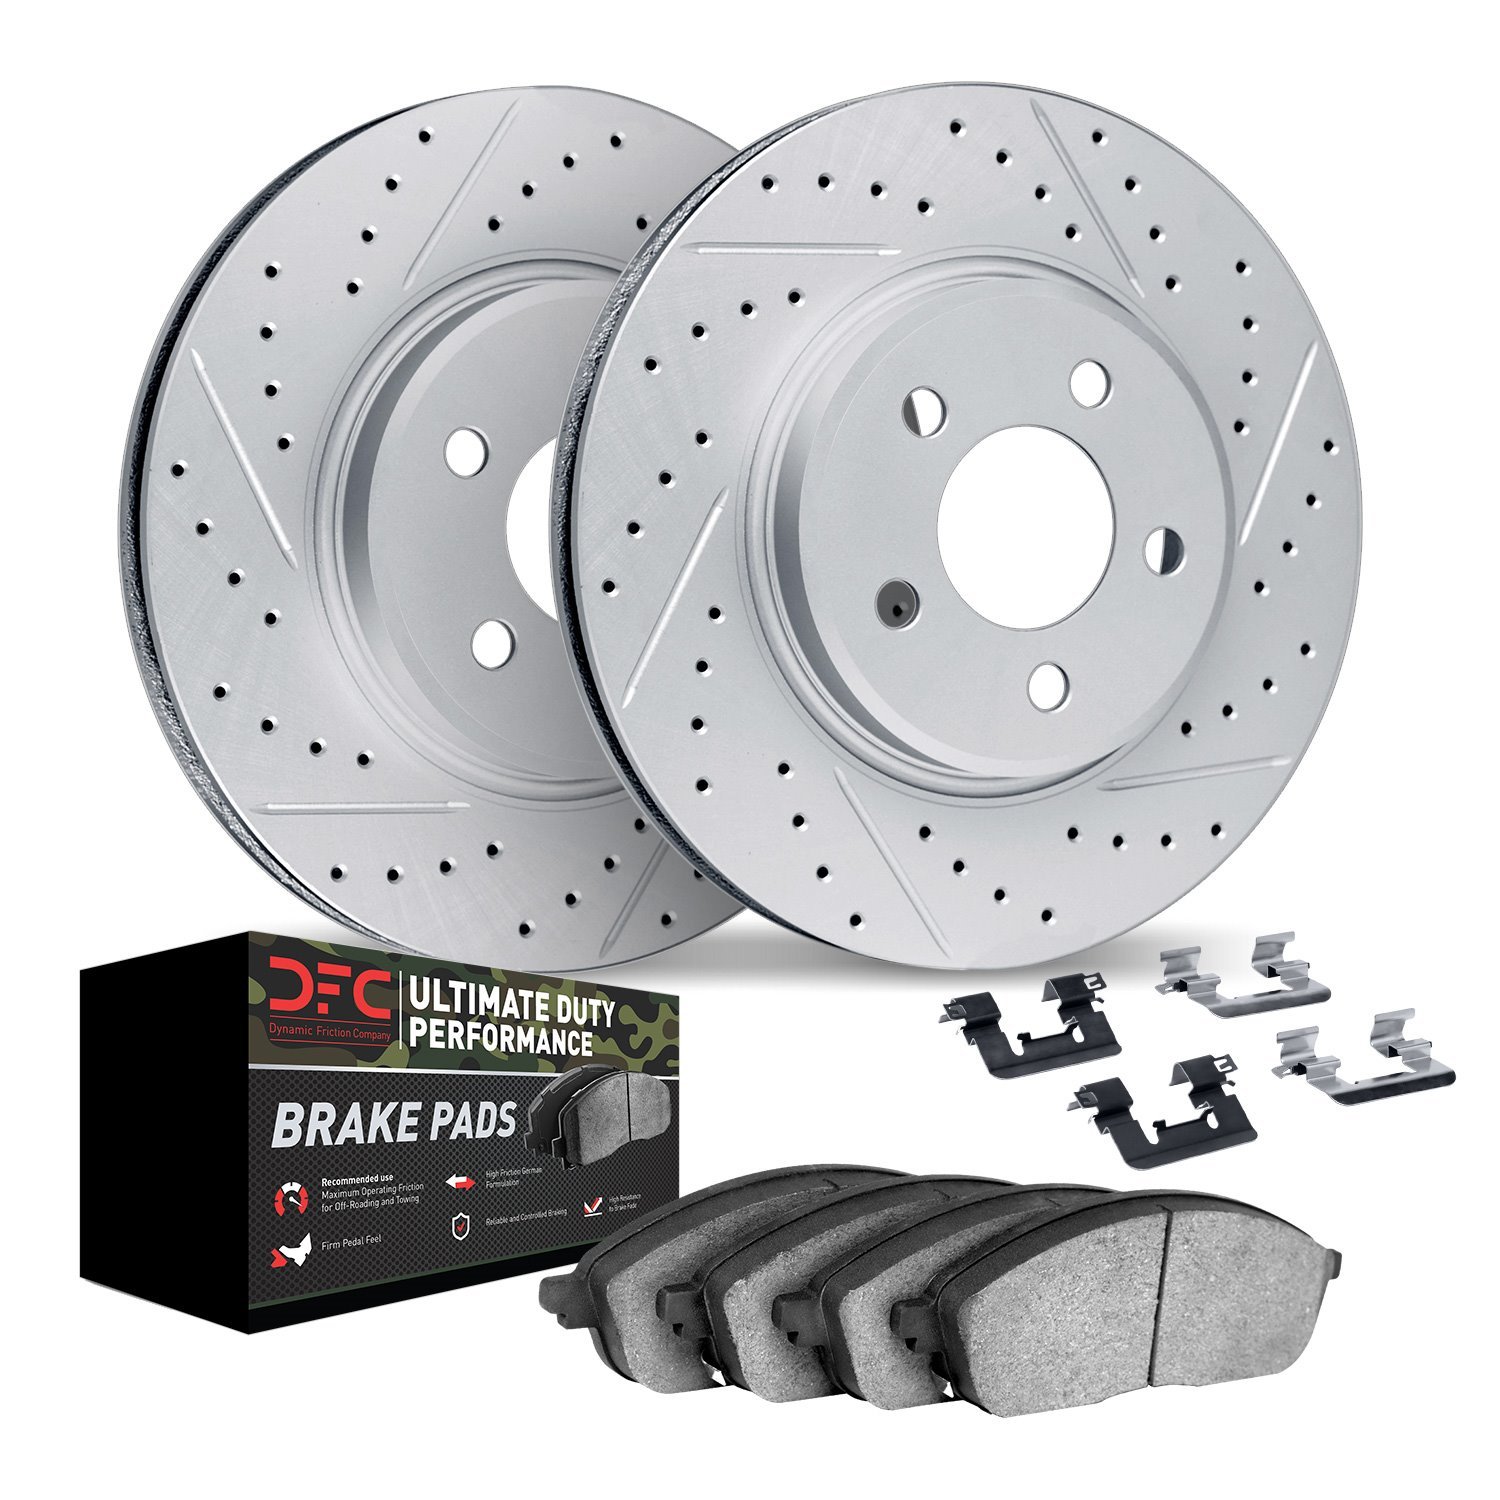 2412-48005 Geoperformance Drilled/Slotted Brake Rotors with Ultimate-Duty Brake Pads Kit & Hardware, 1991-2003 GM, Position: Fro